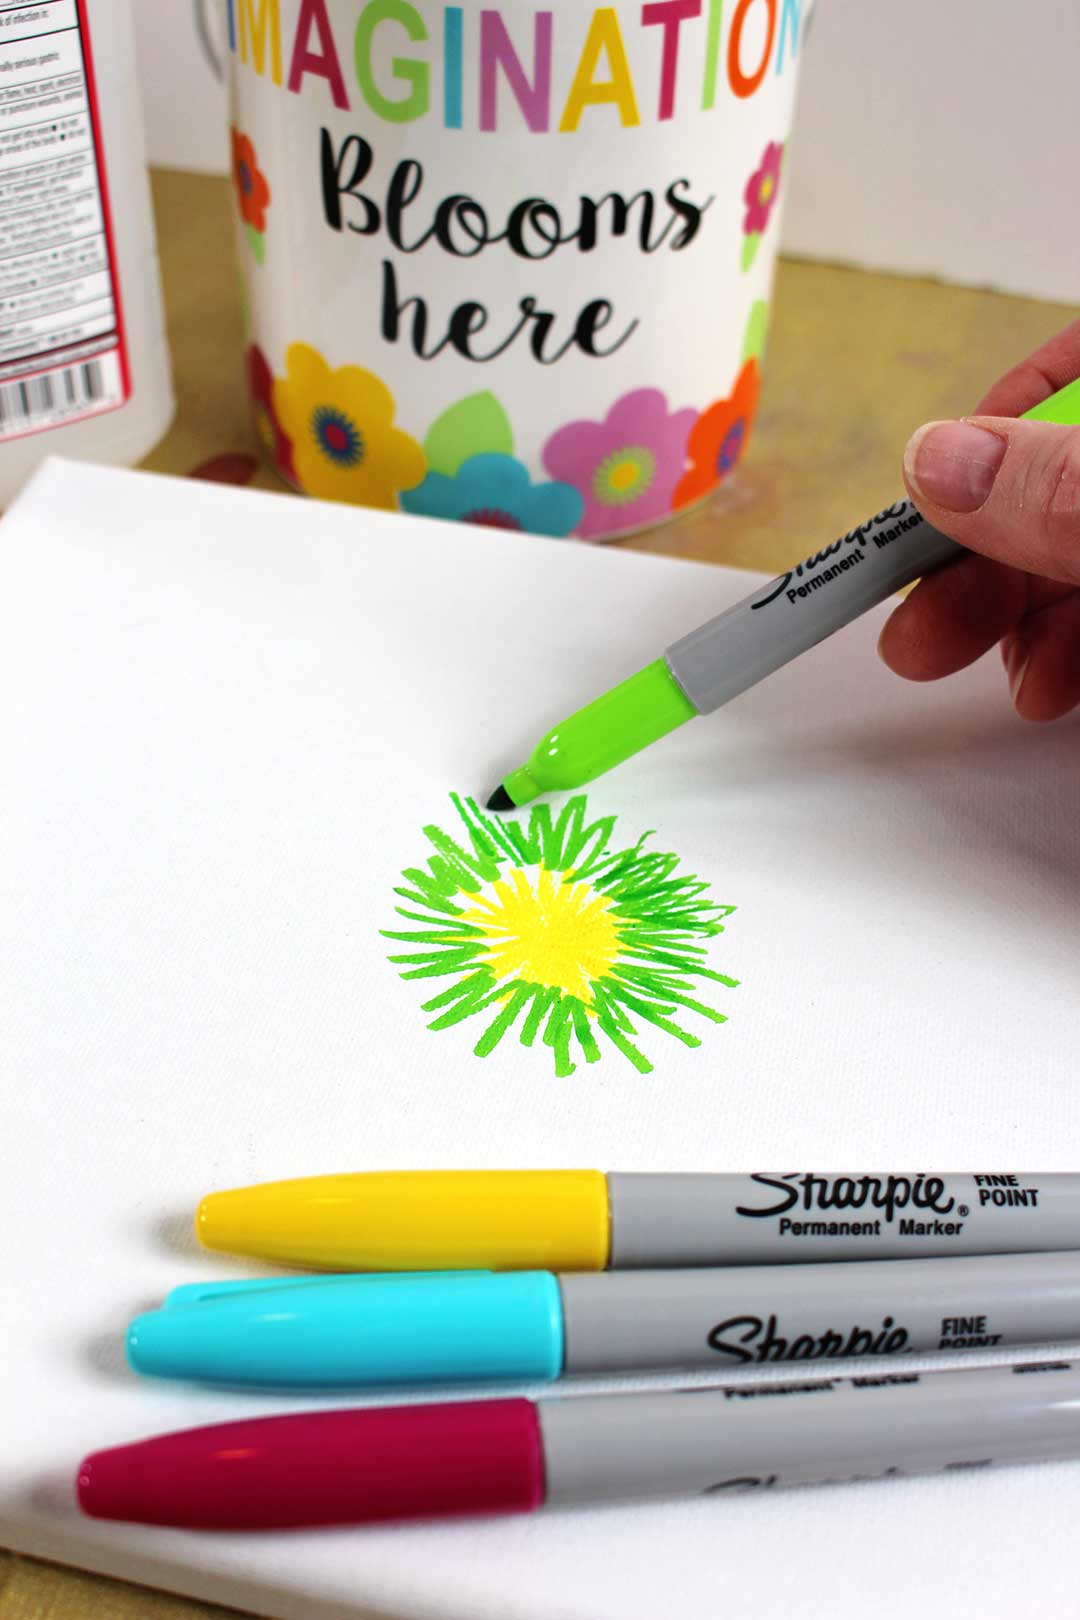 Coloring bright lines on a canvas with a green sharpie marker.